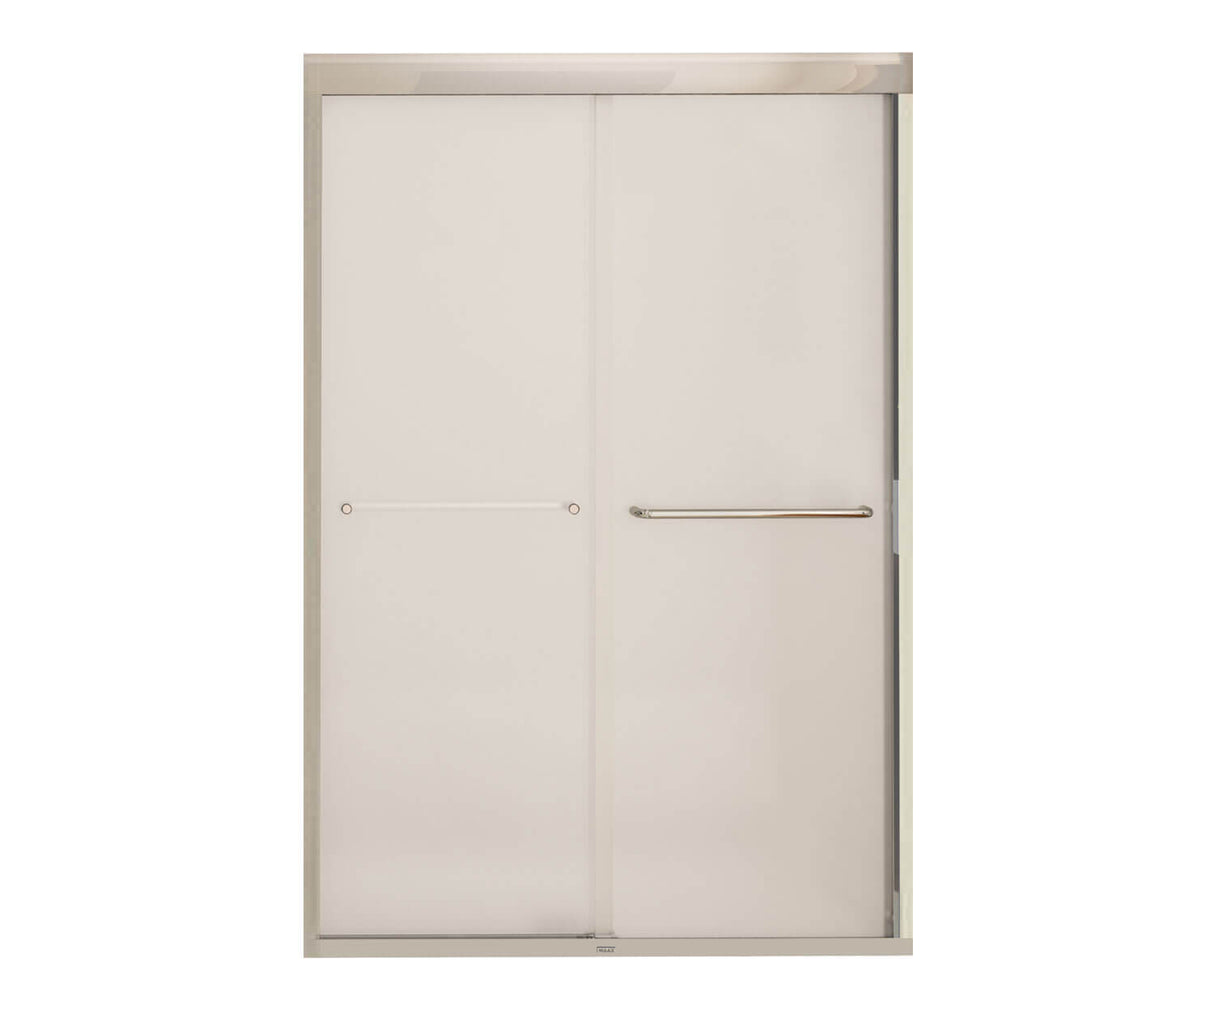 MAAX 134563-978-084-000 Kameleon 43-47 x 71 in. 6 mm Bypass Shower Door for Alcove Installation with Frosted glass in Chrome